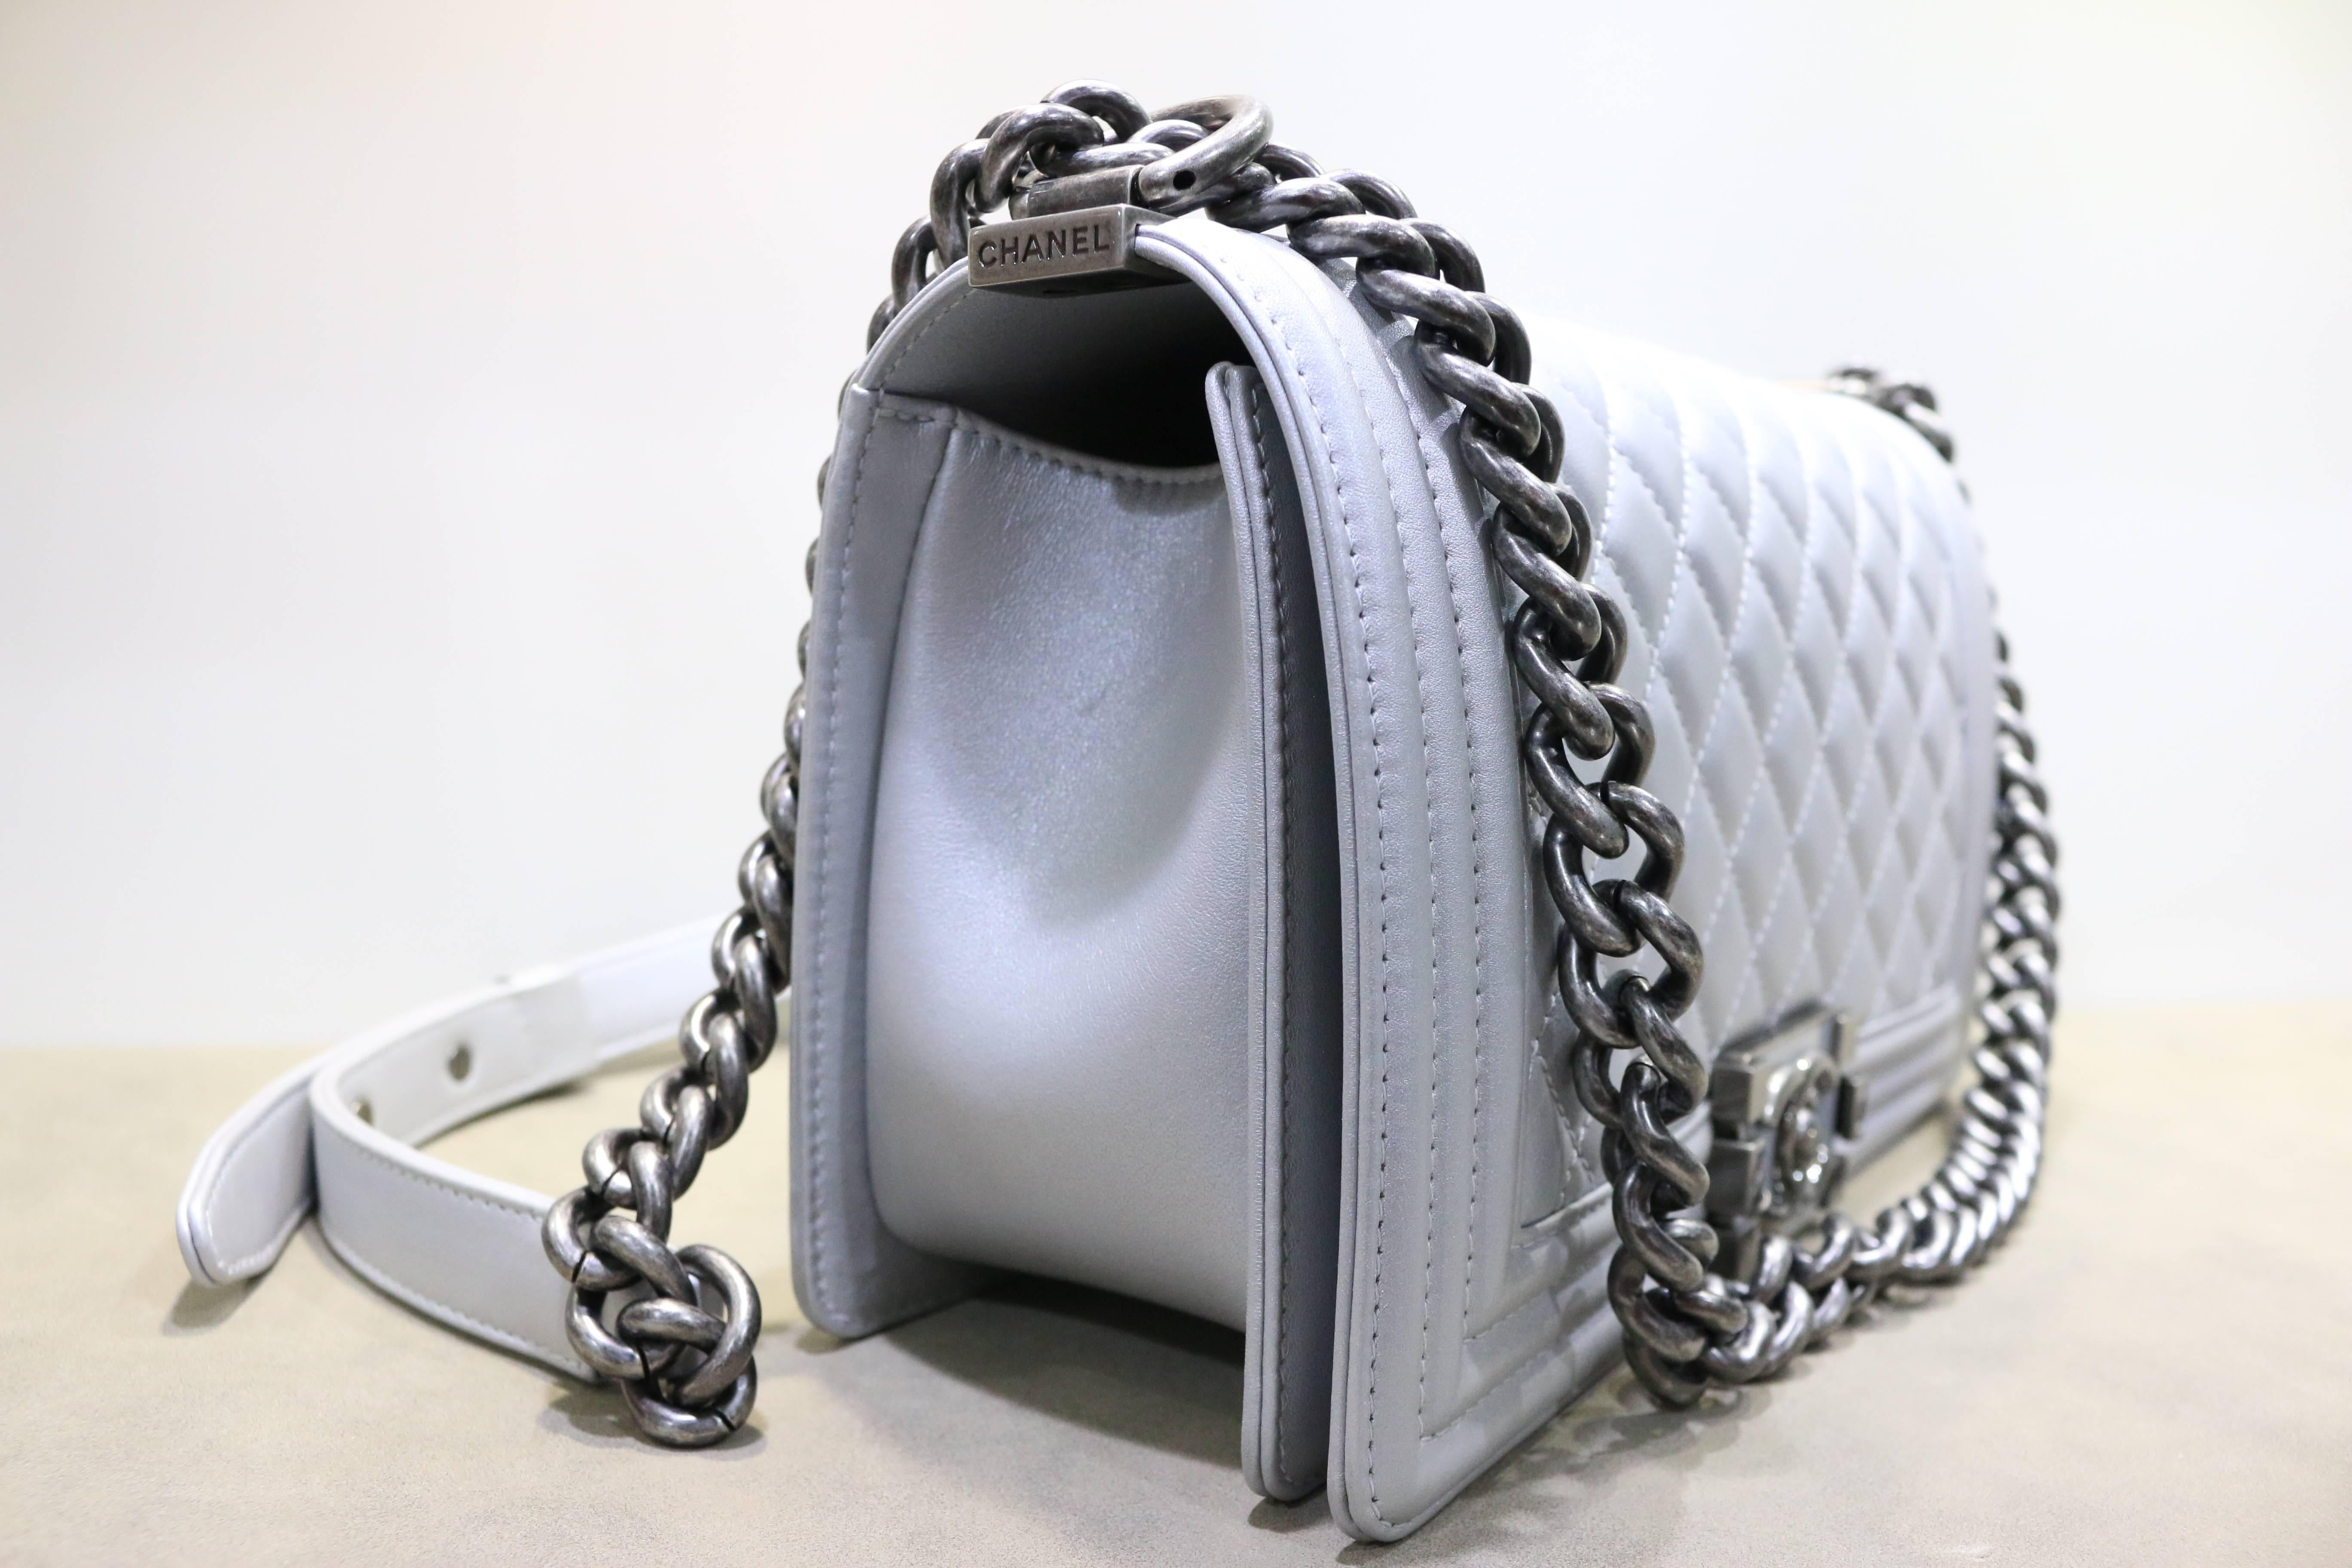 - Chanel silver metallic calfskin quilted medium boy flap bag with ruthenium chain link shoulder straps. Its brand new and never been used before!!!

- Made in Italy. 

- Length: 10 inches. Height: 6 inches. Depth: 3 inches. Strap Drop: 20